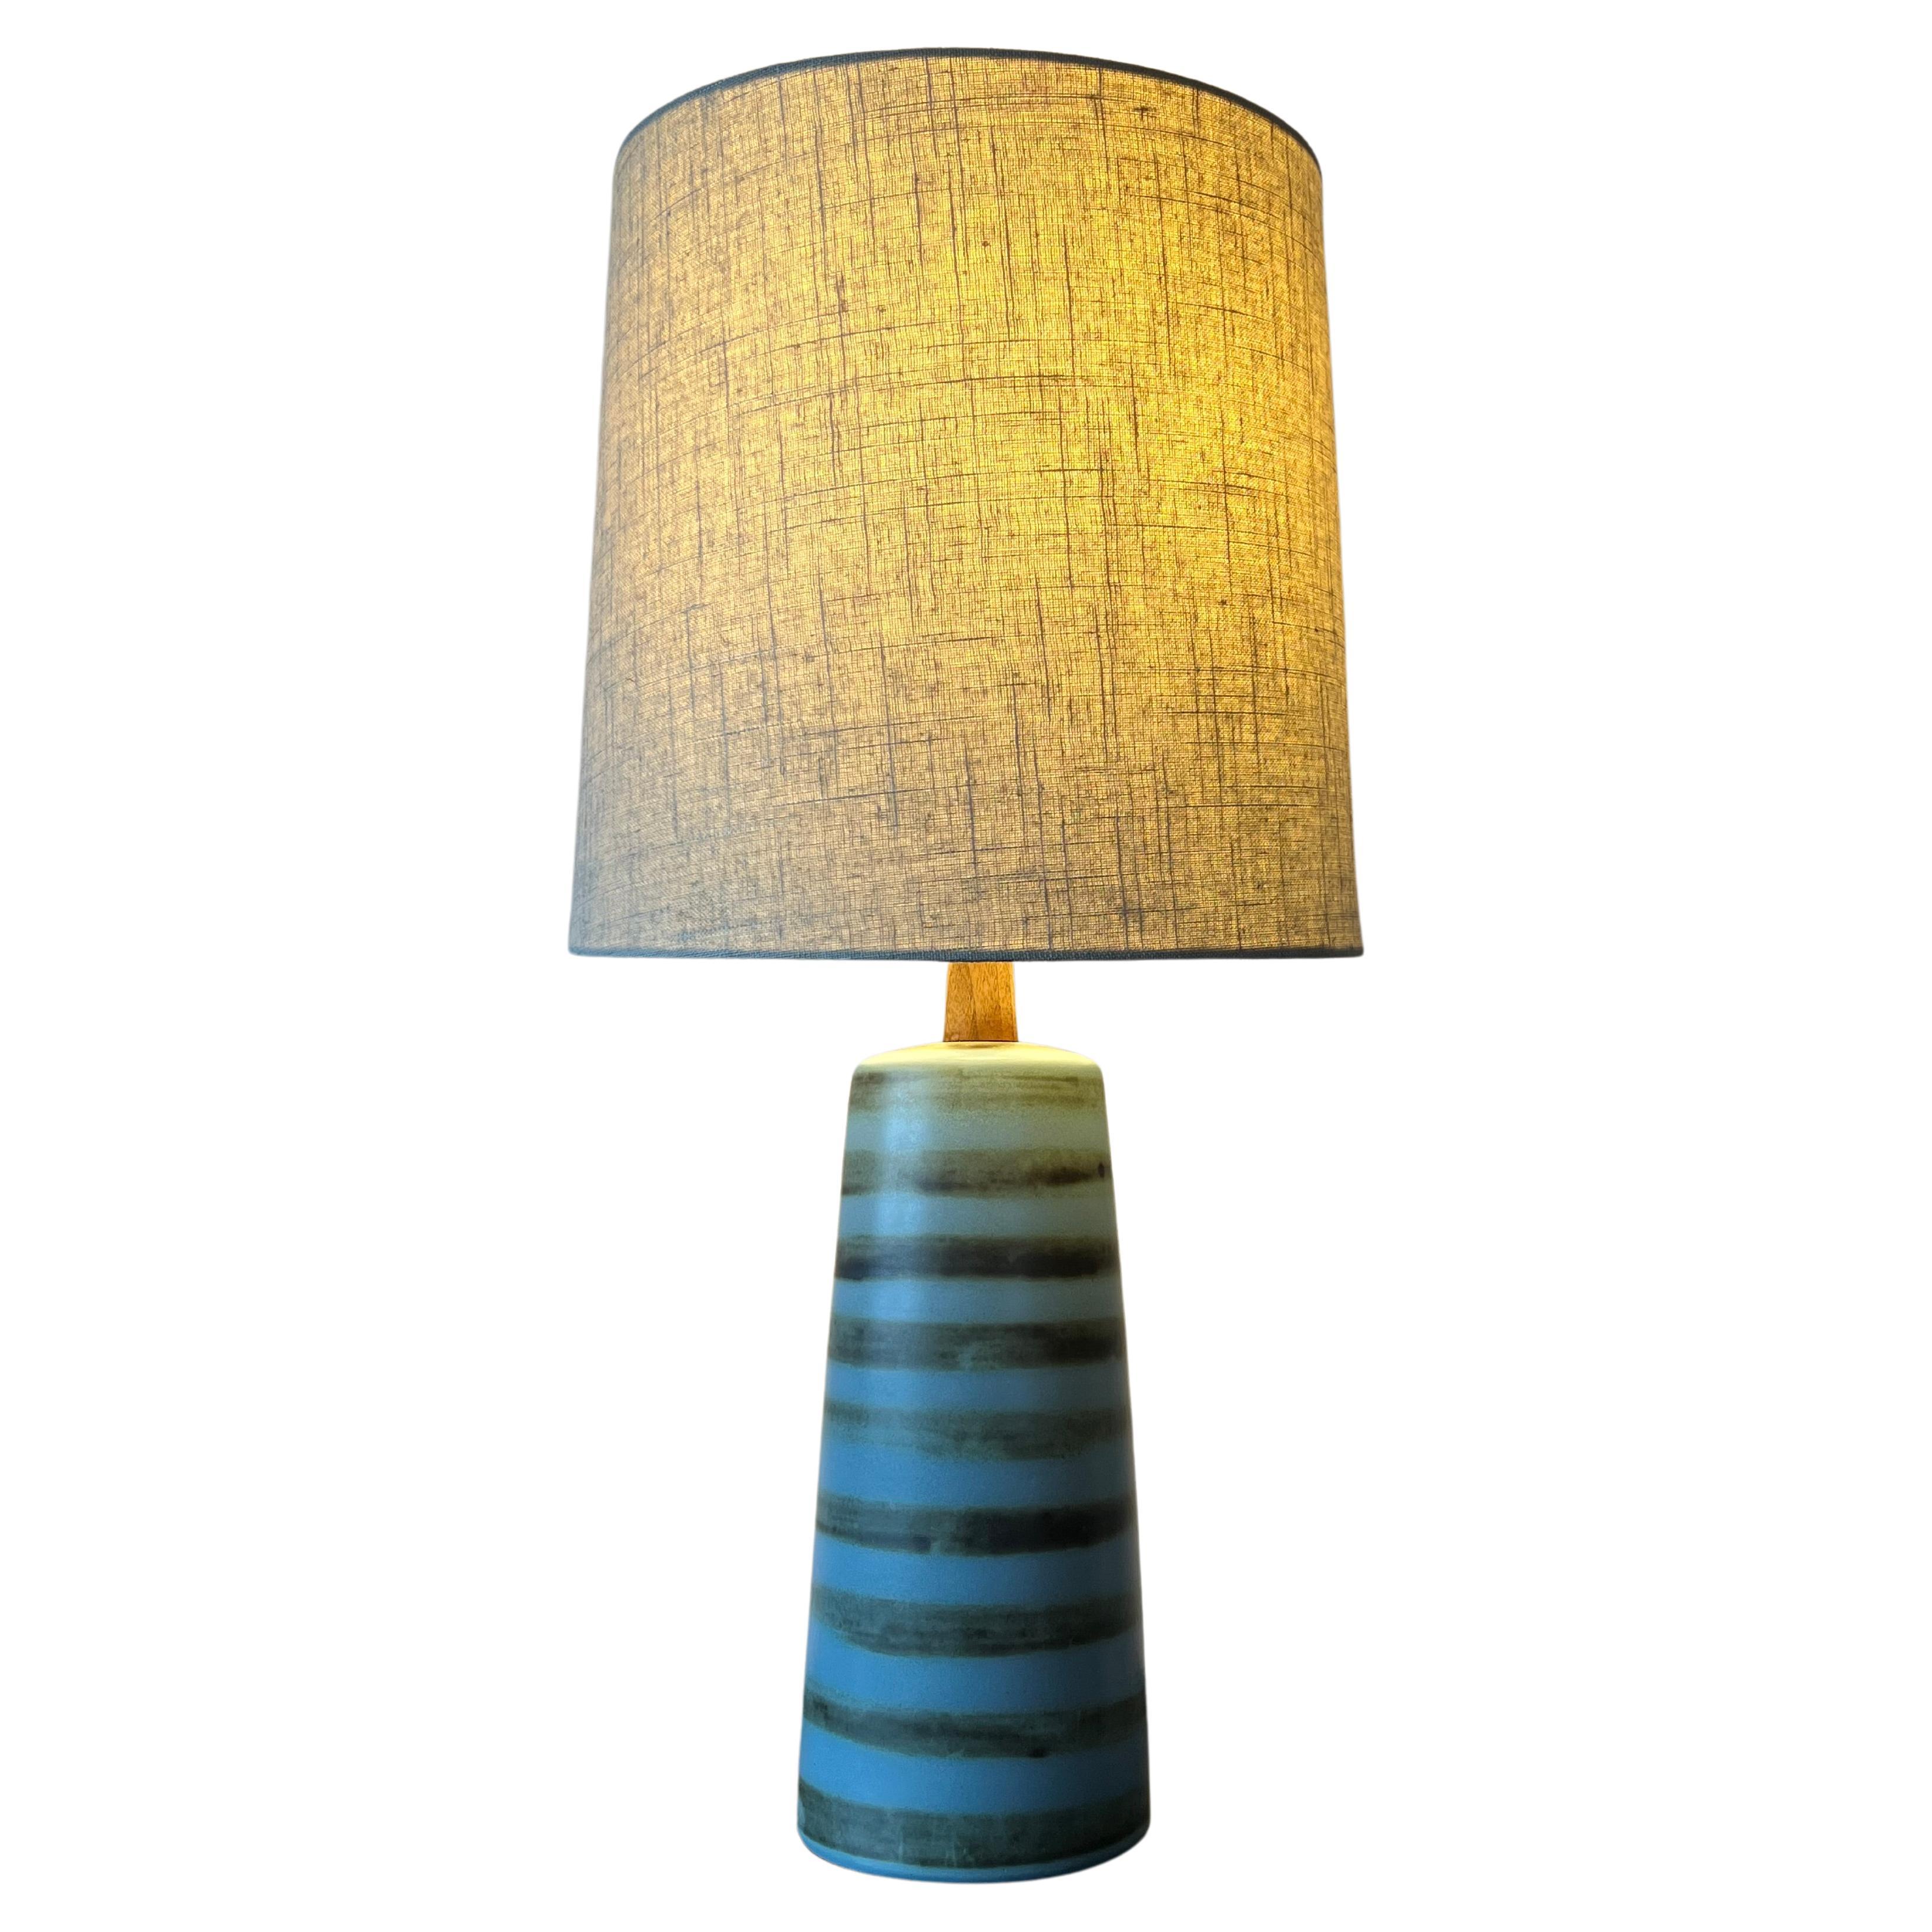 Jane and Gordon Martz Ceramic Table Lamp With Stripes For Sale